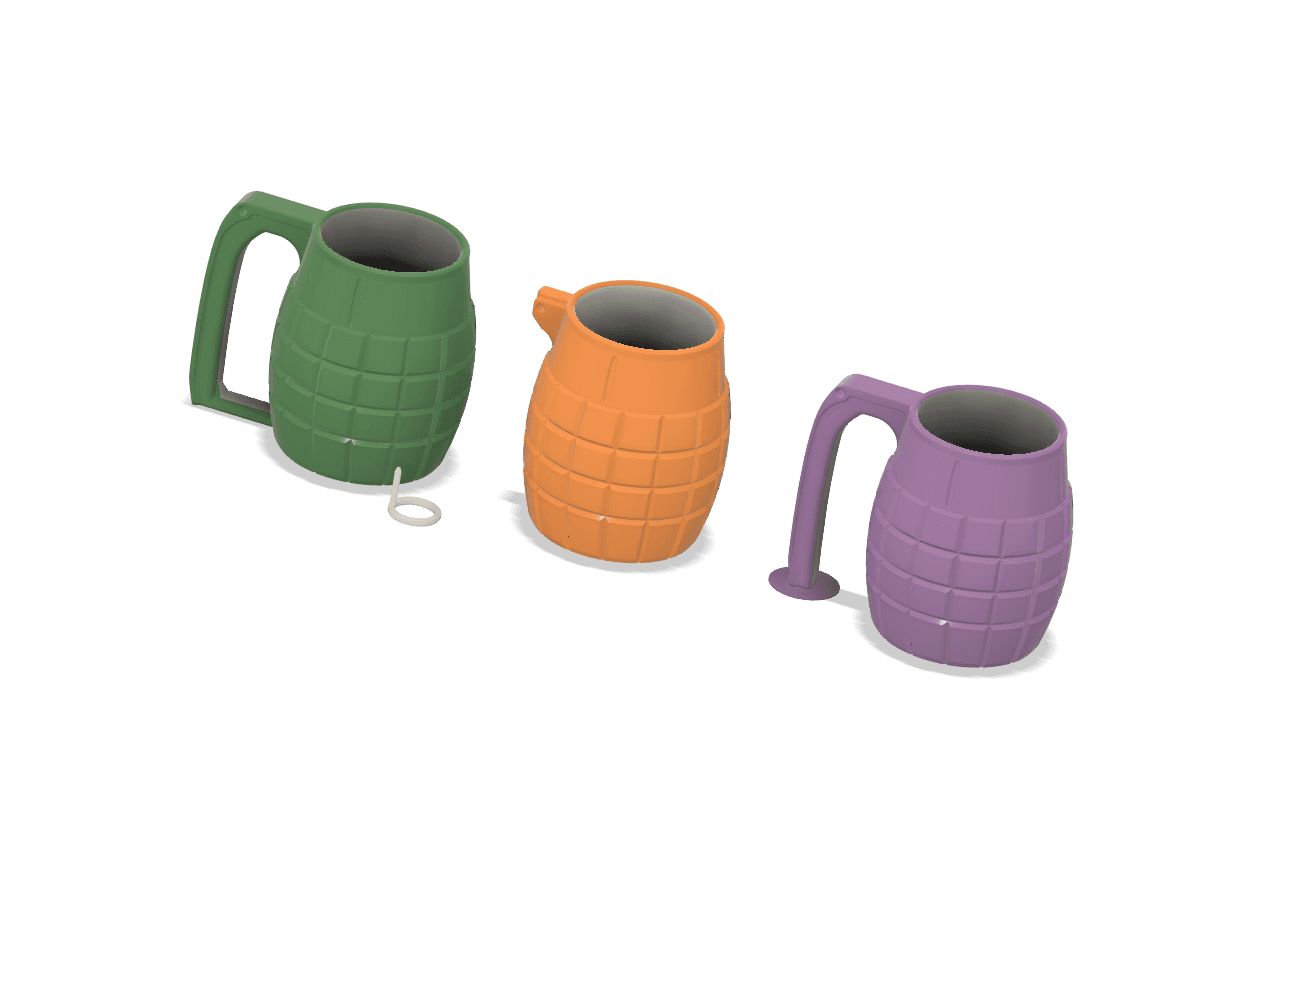 Can'D Grenade - 12oz Can Cup - 2022 UPDATE! 3d model